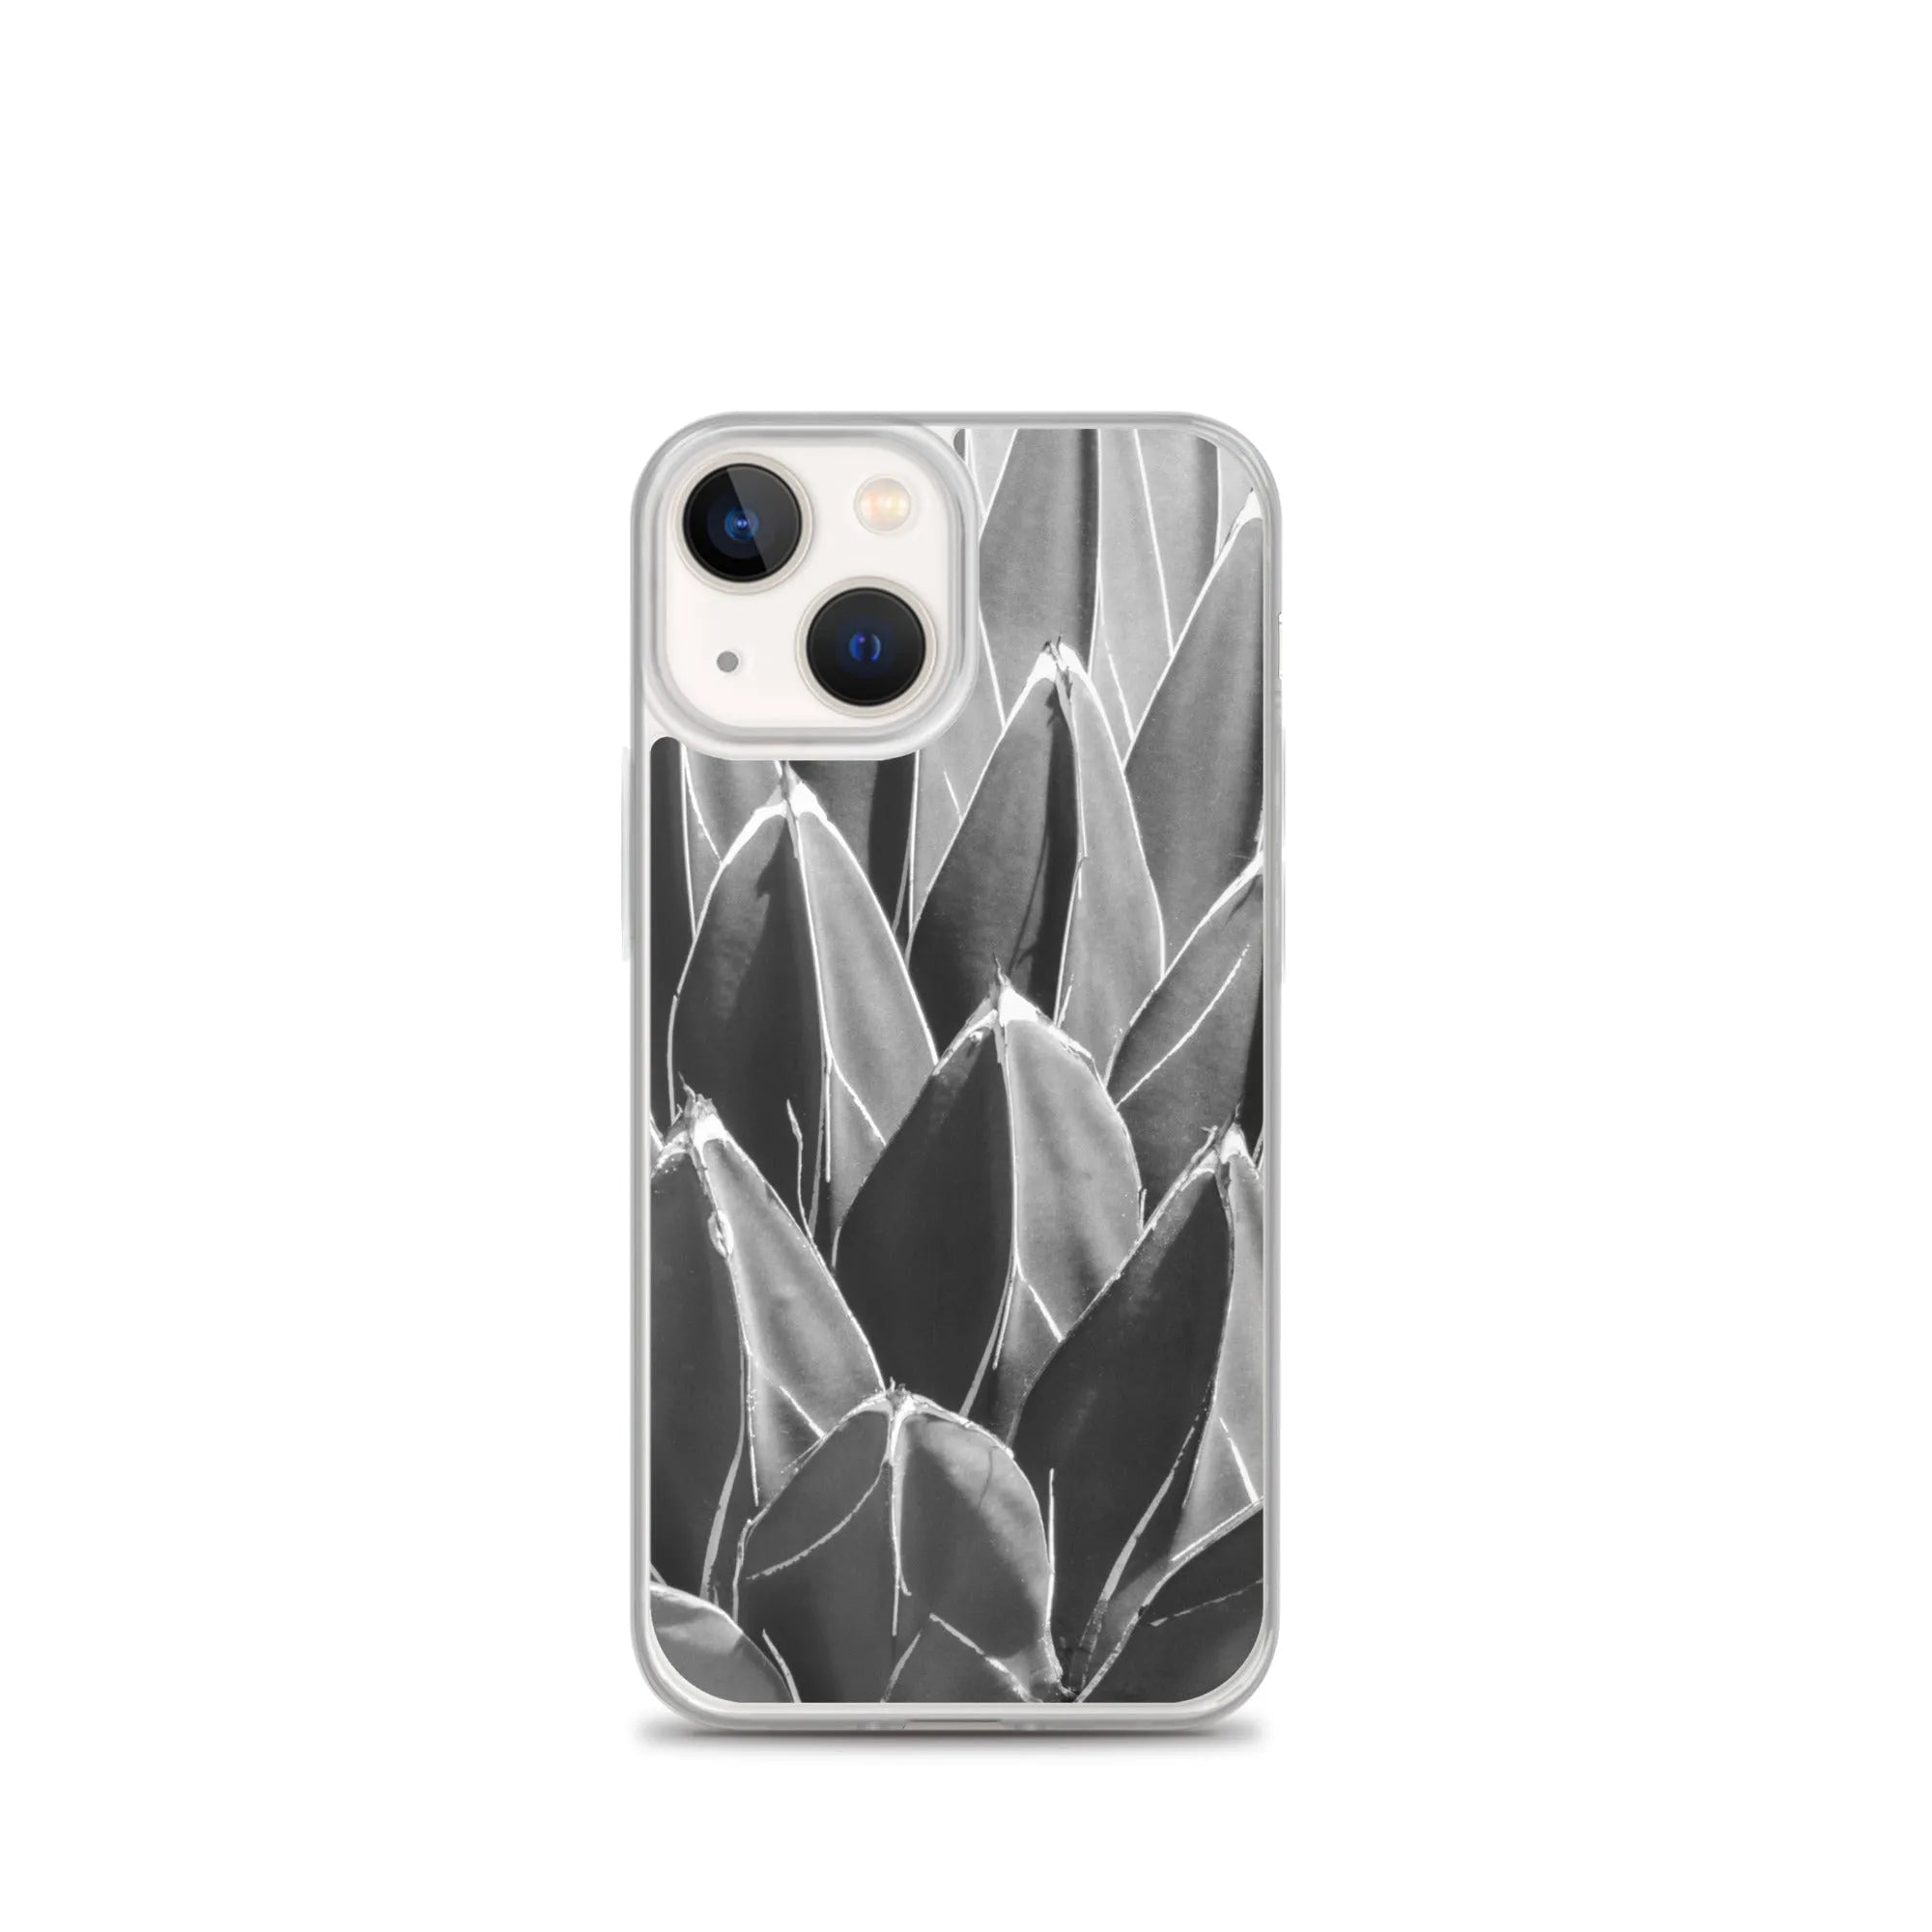 Decked Out Botanical Art Iphone Case - black And White - Iphone 13 Mini - Mobile Phone Cases - Aesthetic Art